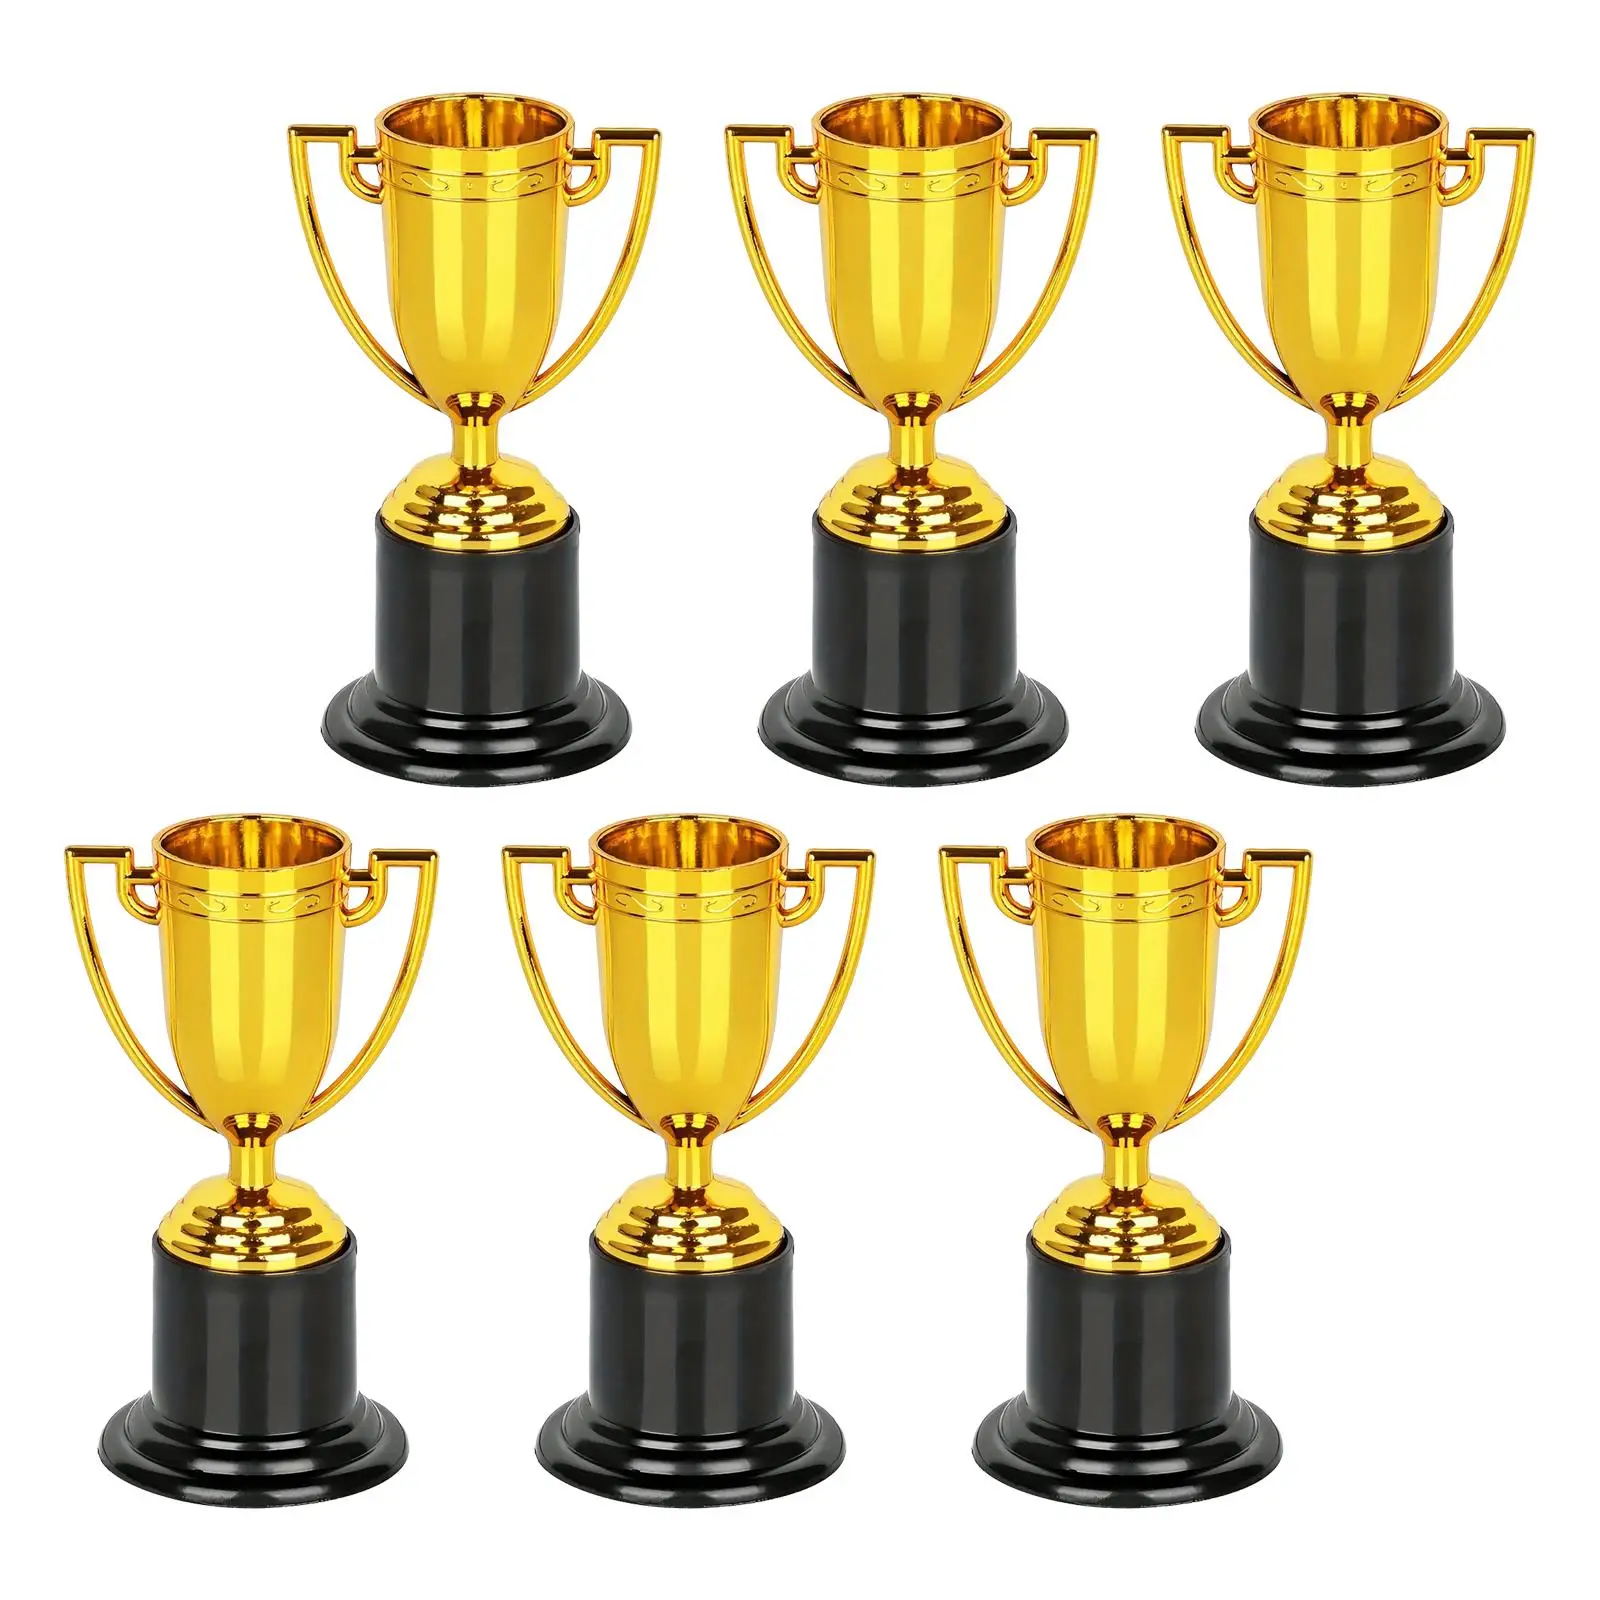 6x Children Trophies Funny Round Base Trophies for Kids for Celebrations Competitions Rewards Party Favors Sports Championships